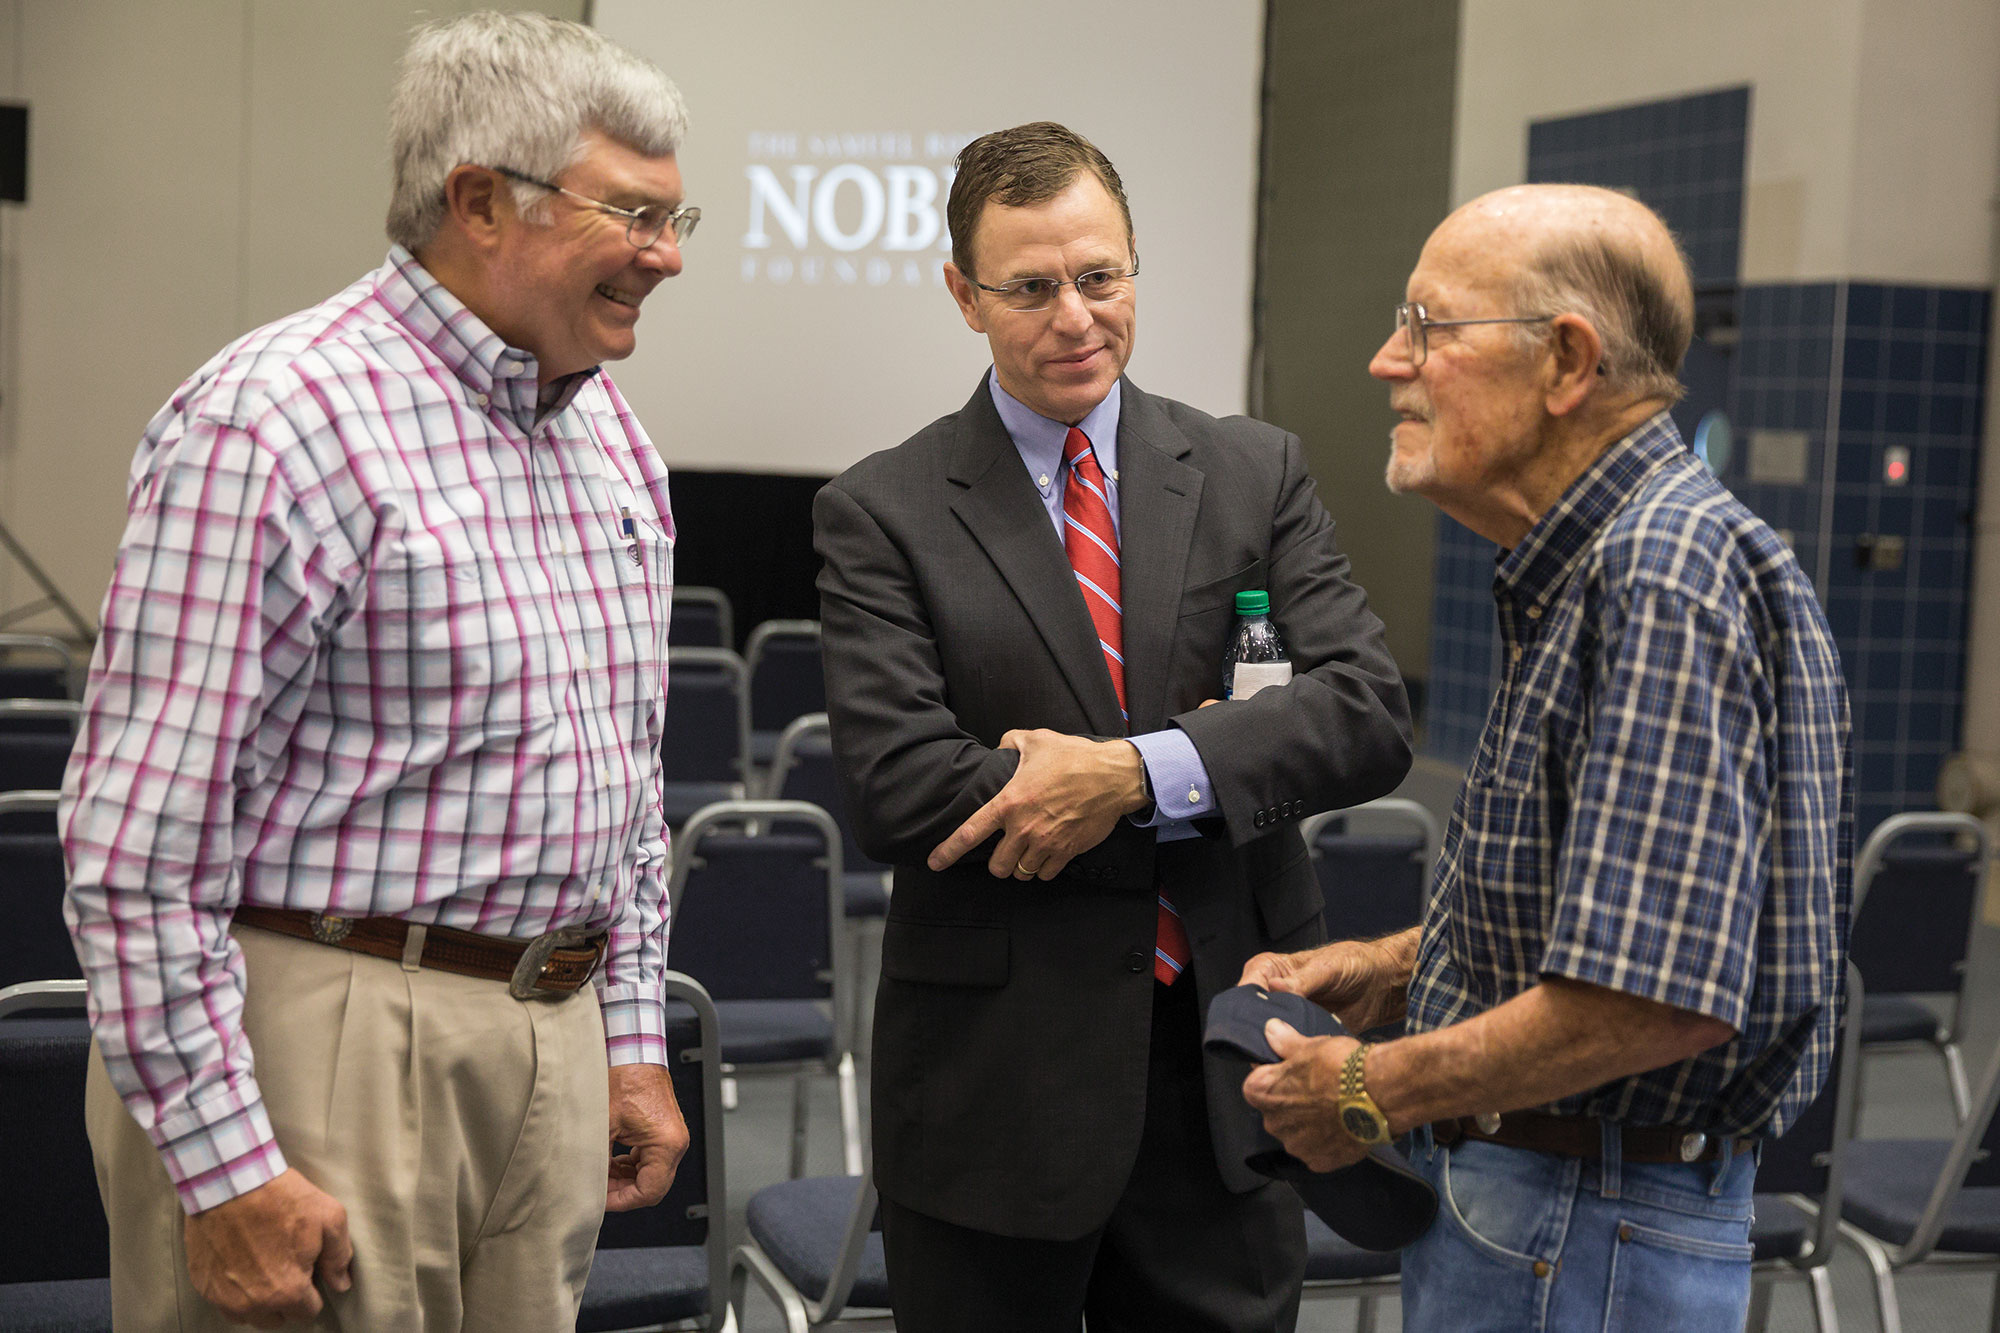 Steve Rhines (center) listens to Noble retirees Fred Schmedt (left) and Gary Simmons following the announcement that the Noble Foundation would be renamed as the Noble Research Institute.